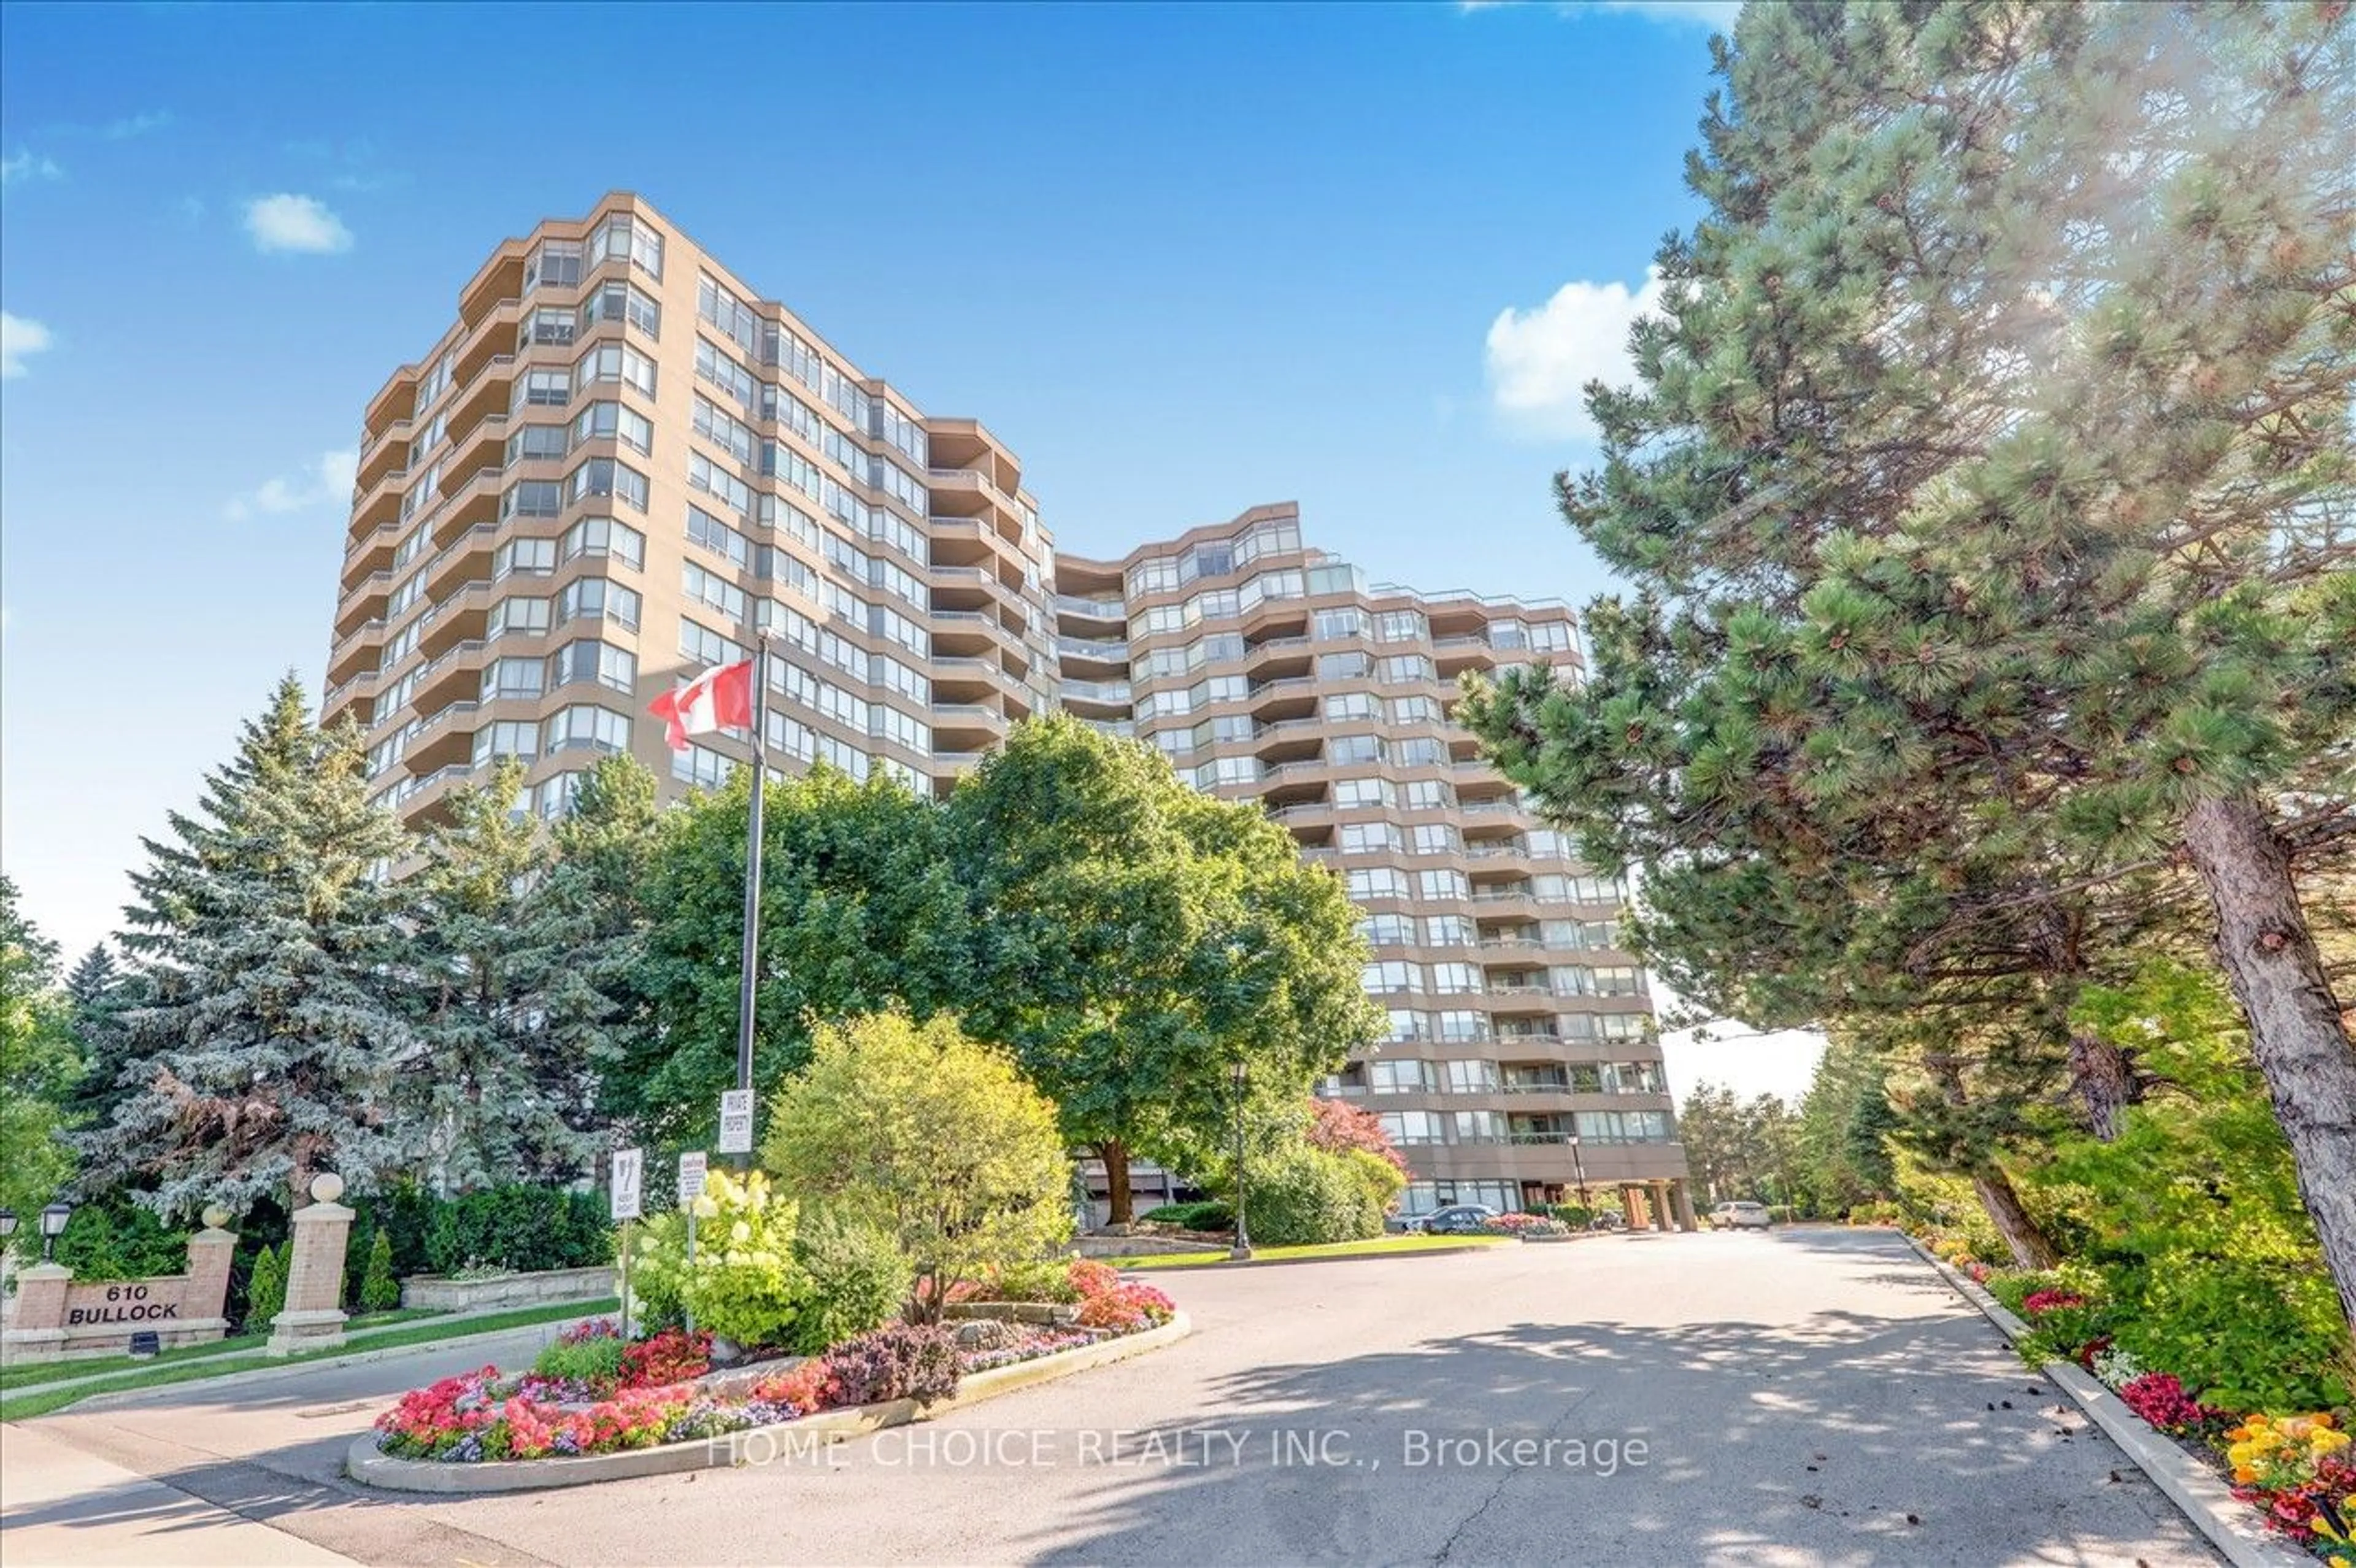 A pic from exterior of the house or condo for 610 Bullock Dr #217, Markham Ontario L3R 0G1